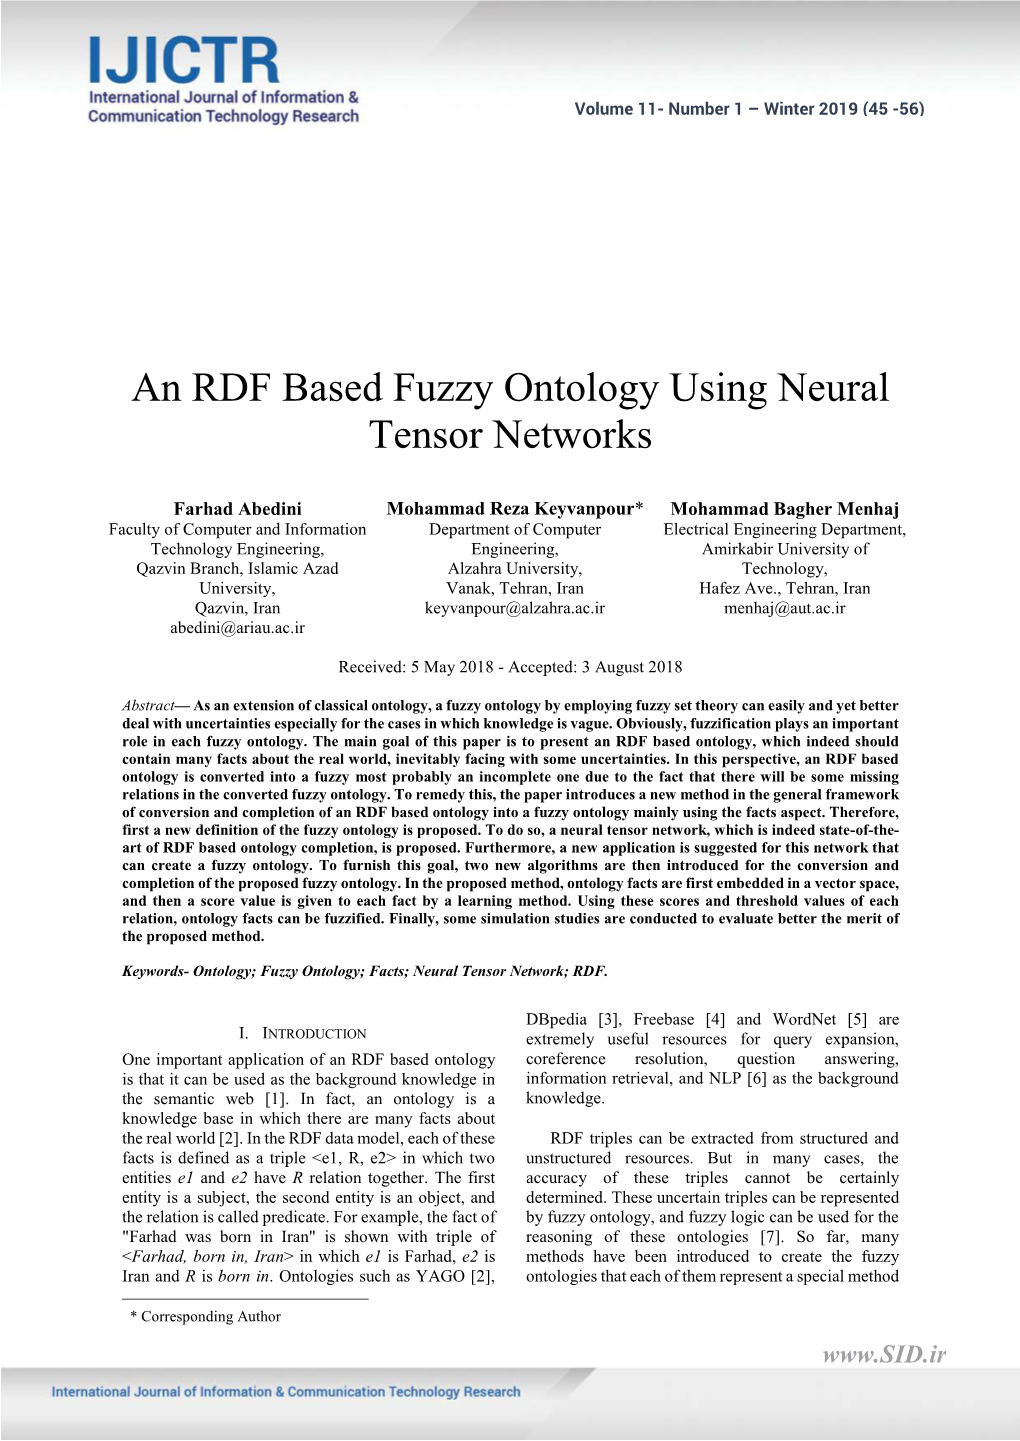 An RDF Based Fuzzy Ontology Using Neural Tensor Networks